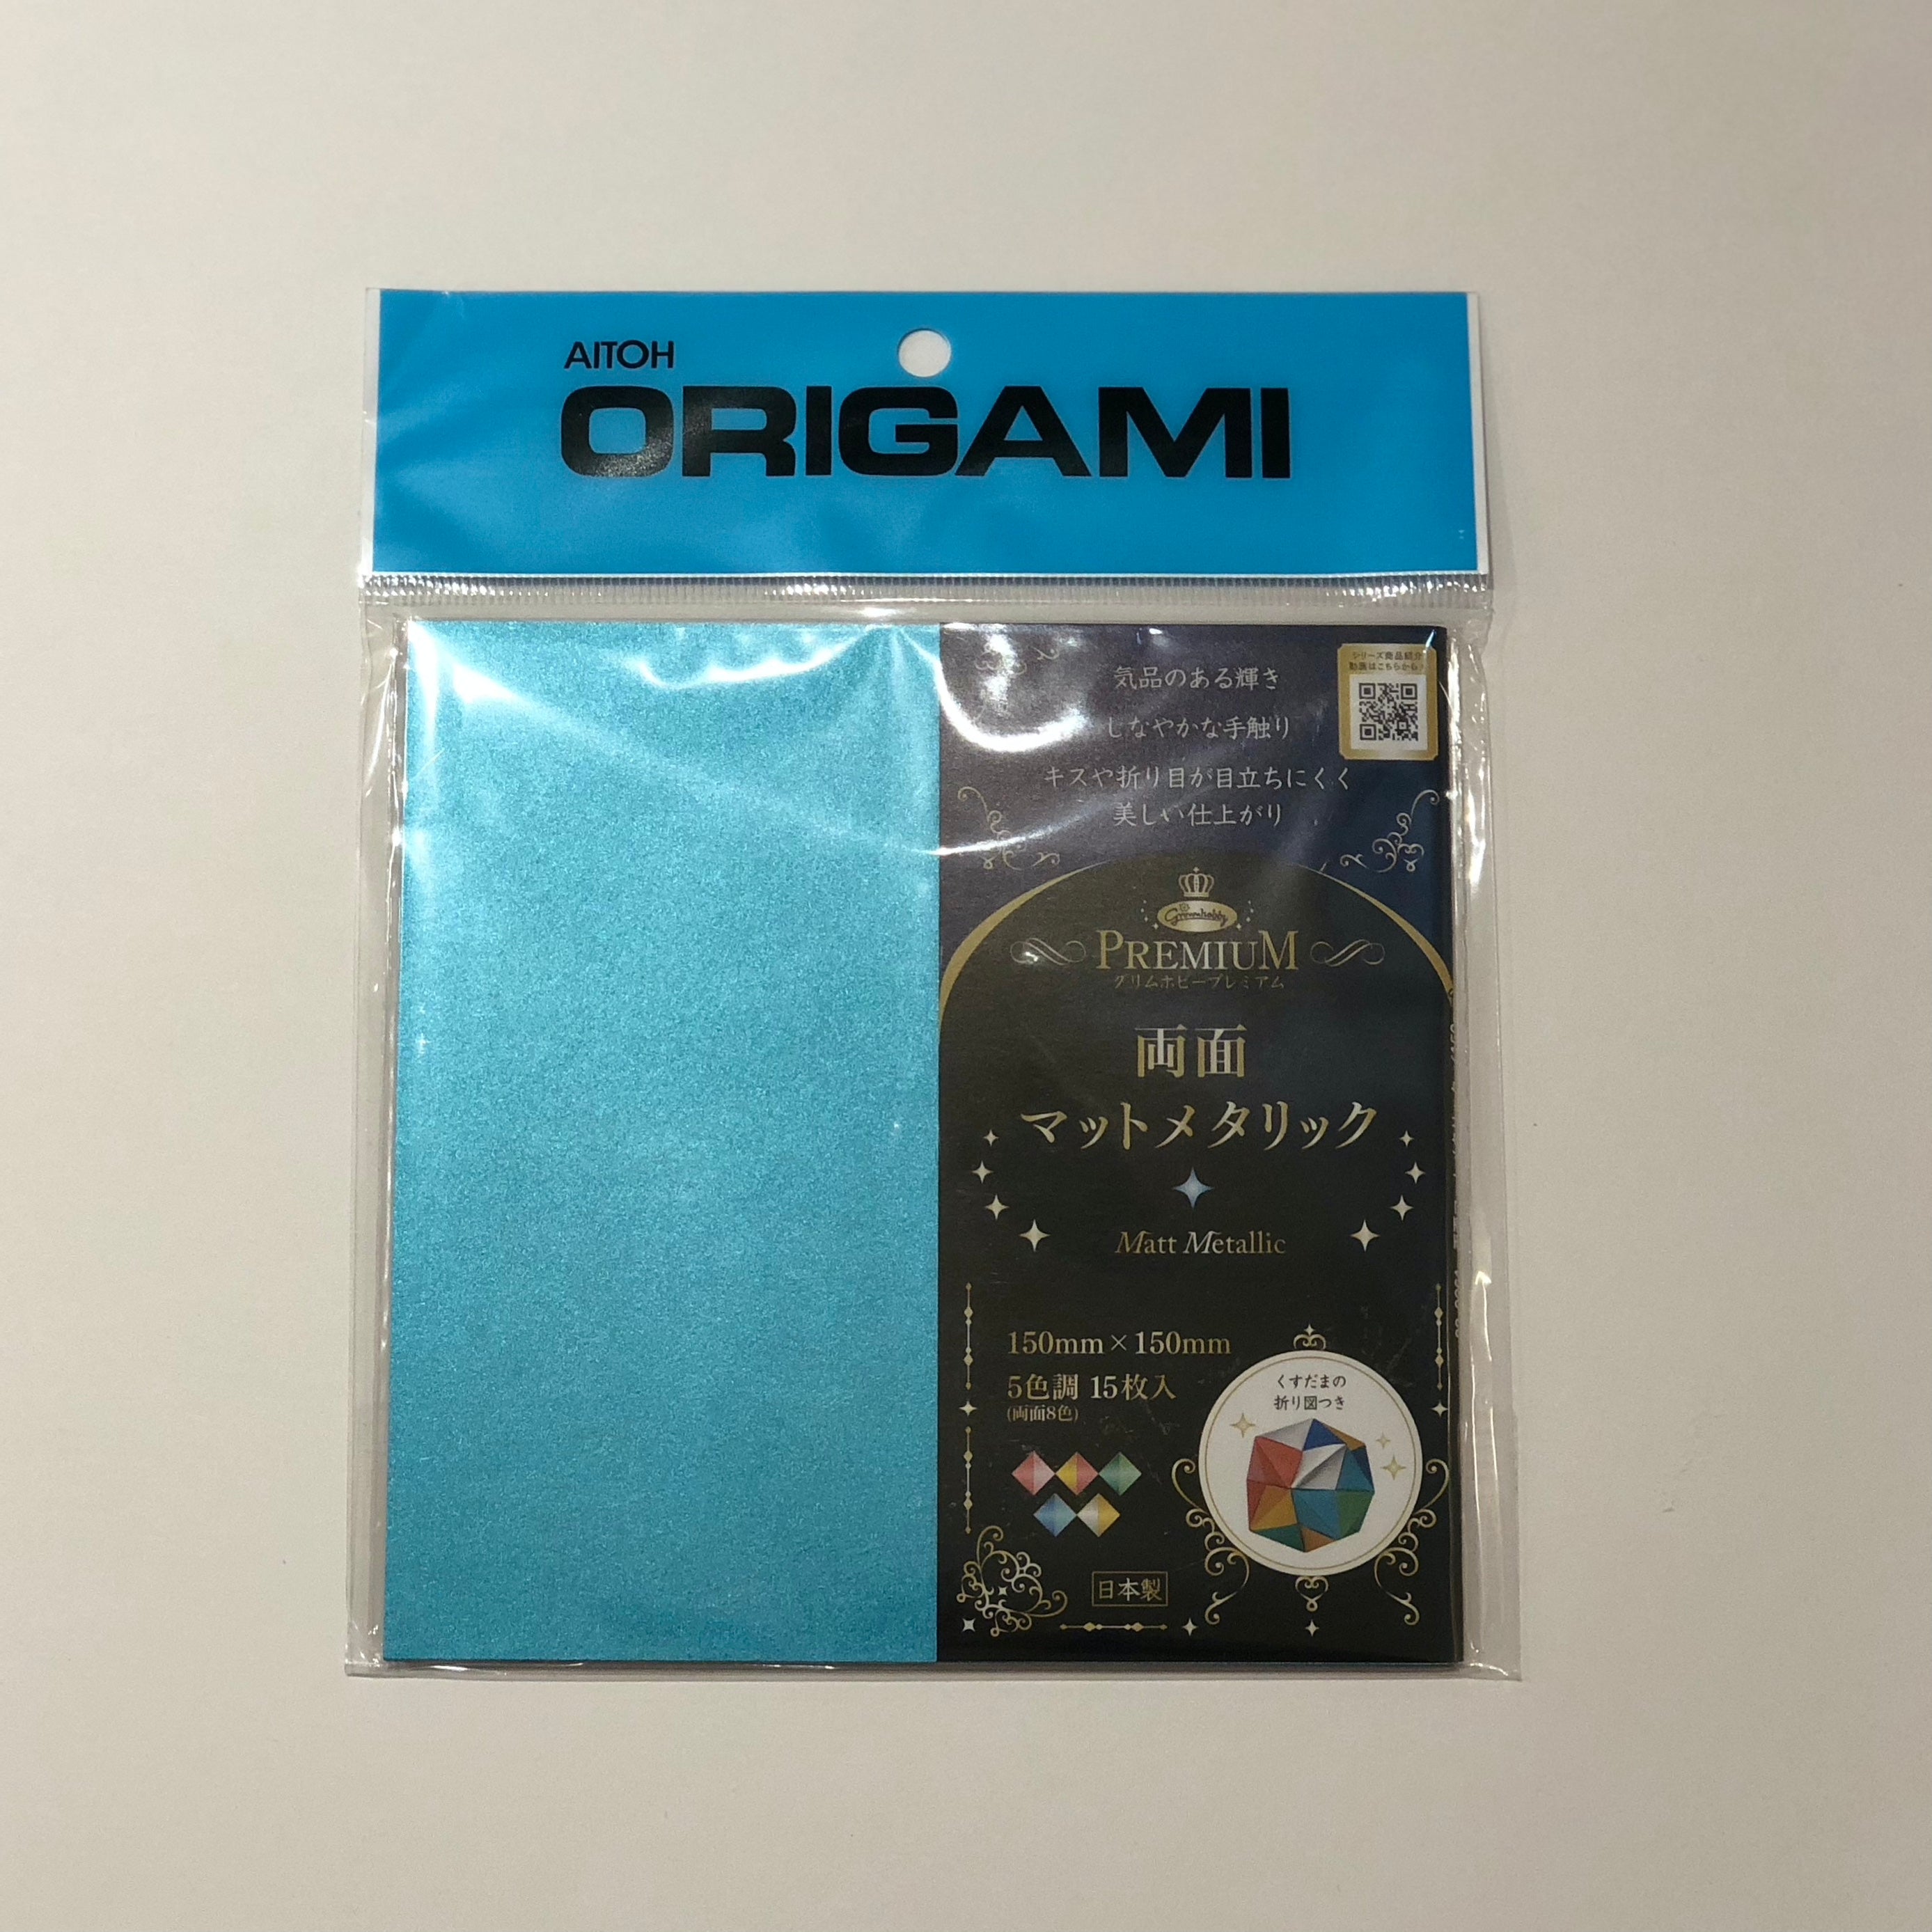 Aitoh DoubleSided Origami Papers